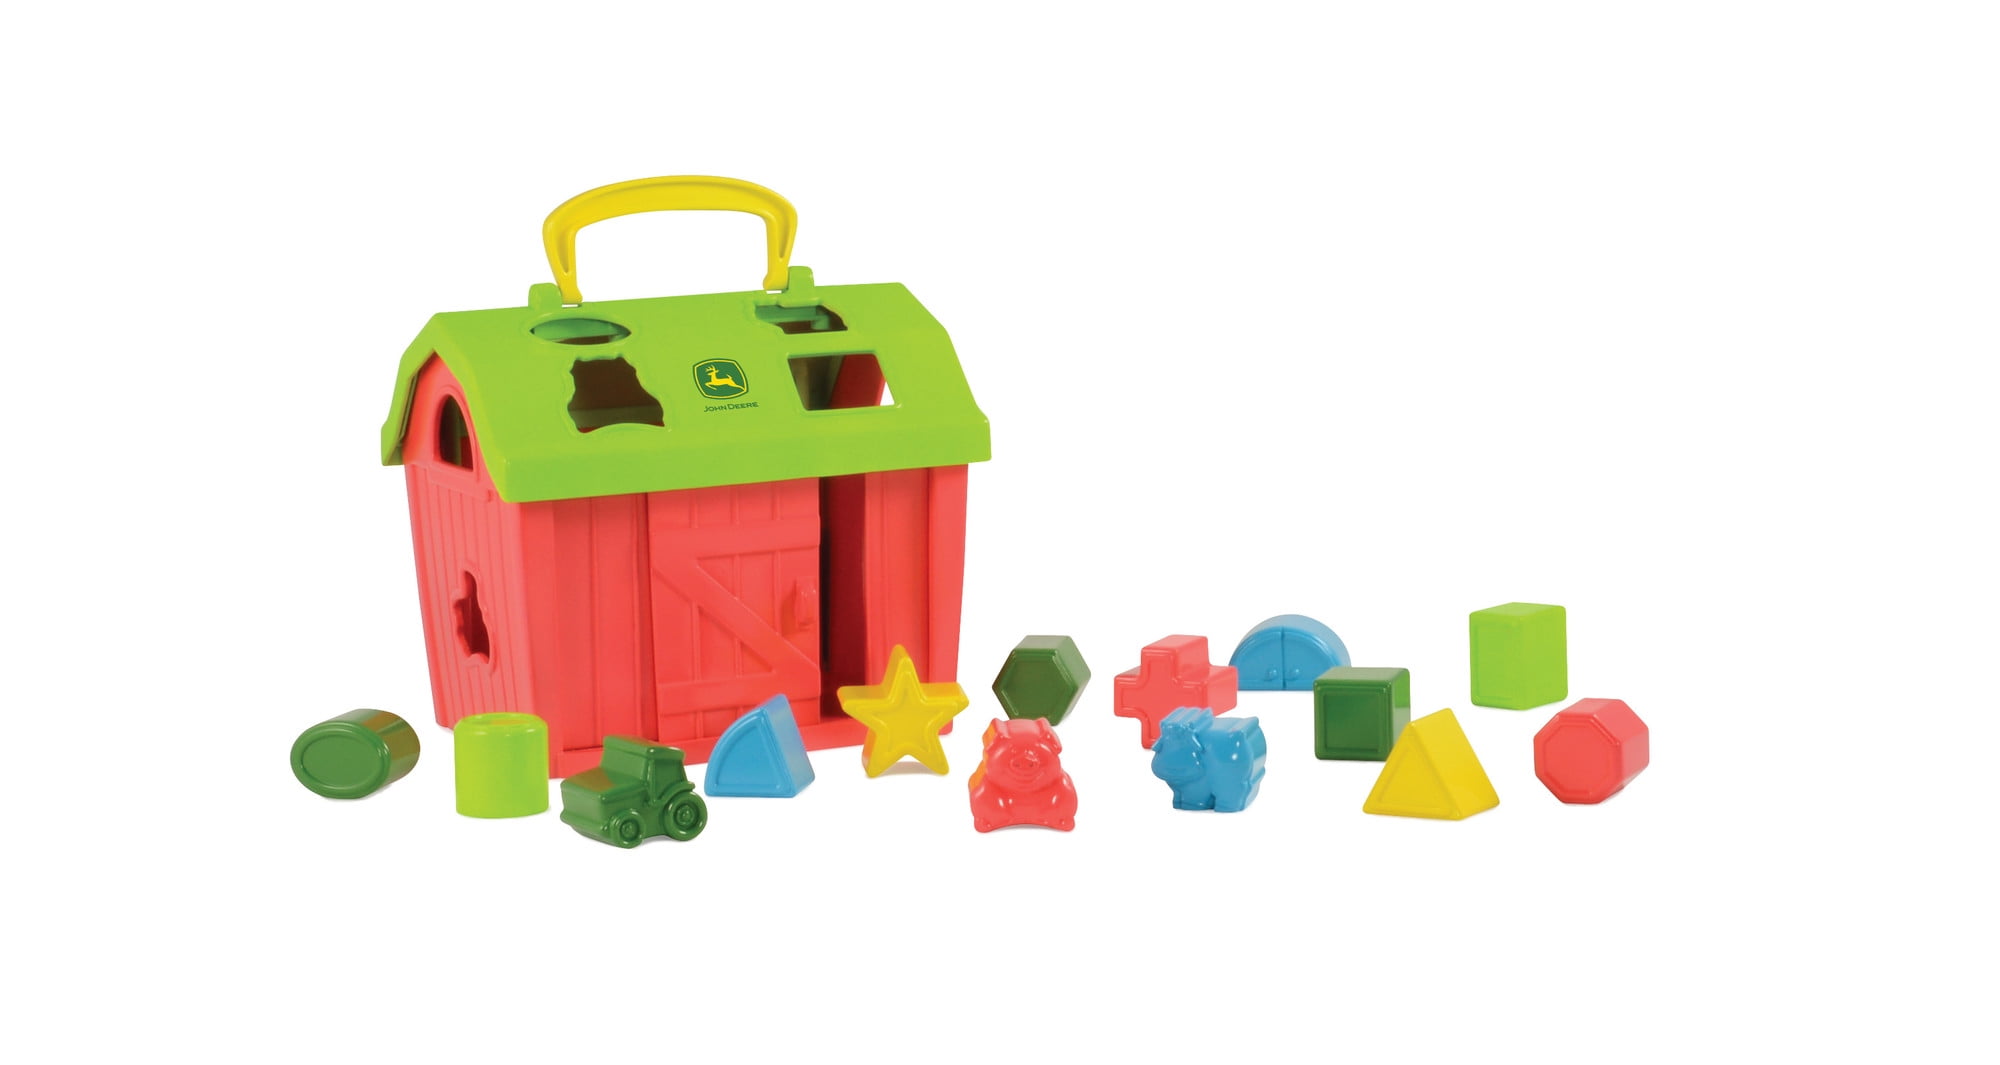 NEW Spark Create Image 16 Piece Shape Sorter for Motor & Recognition Skills READ 